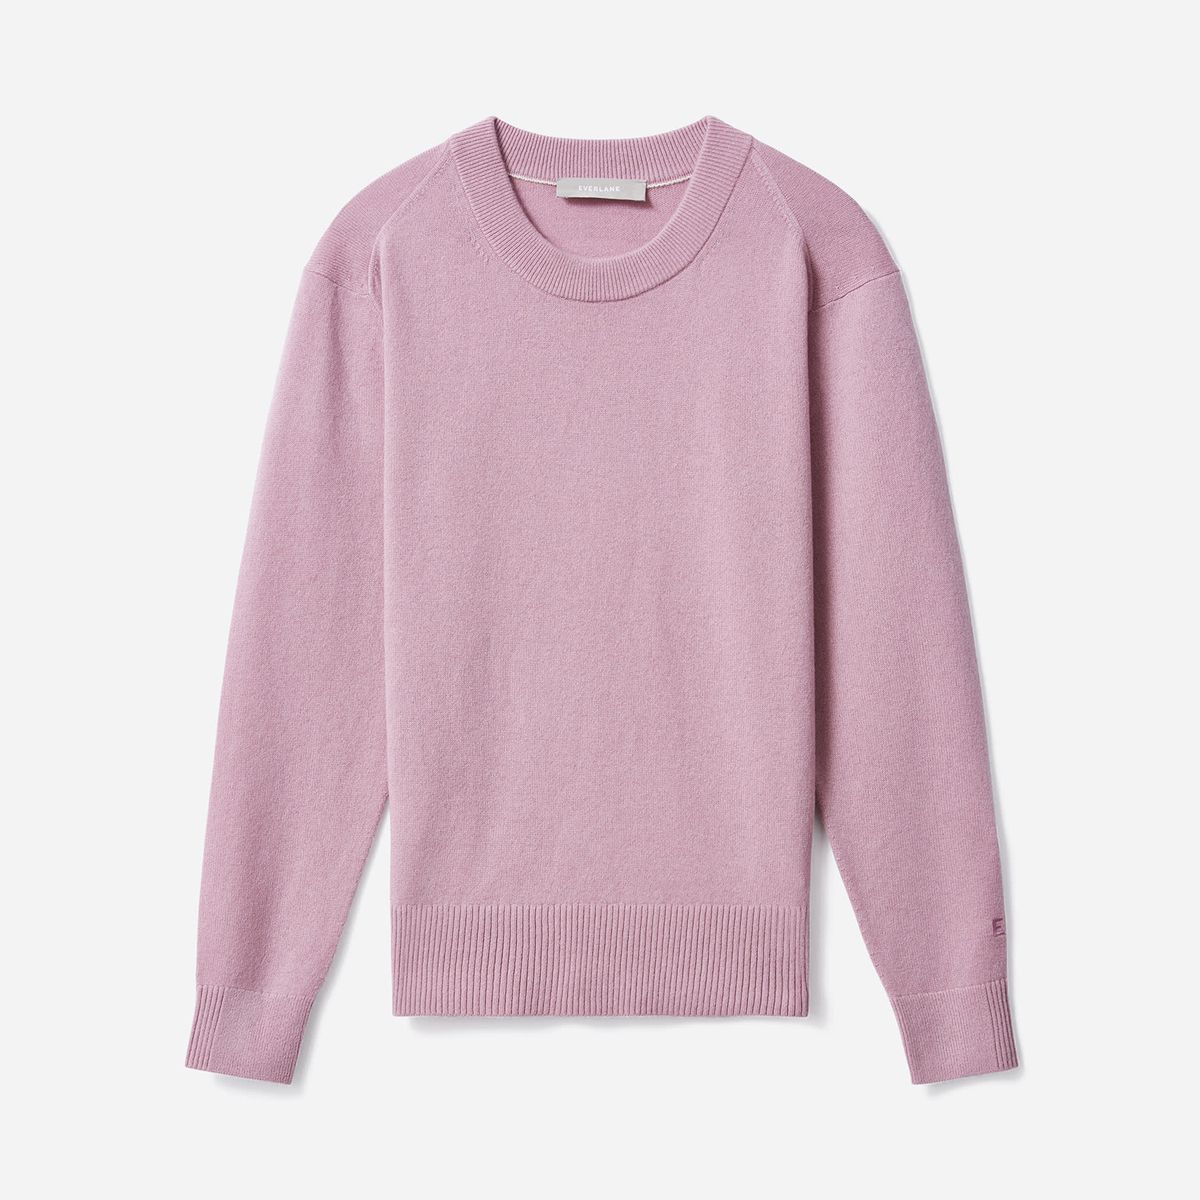 Everlane The Cashmere Crew in Lily